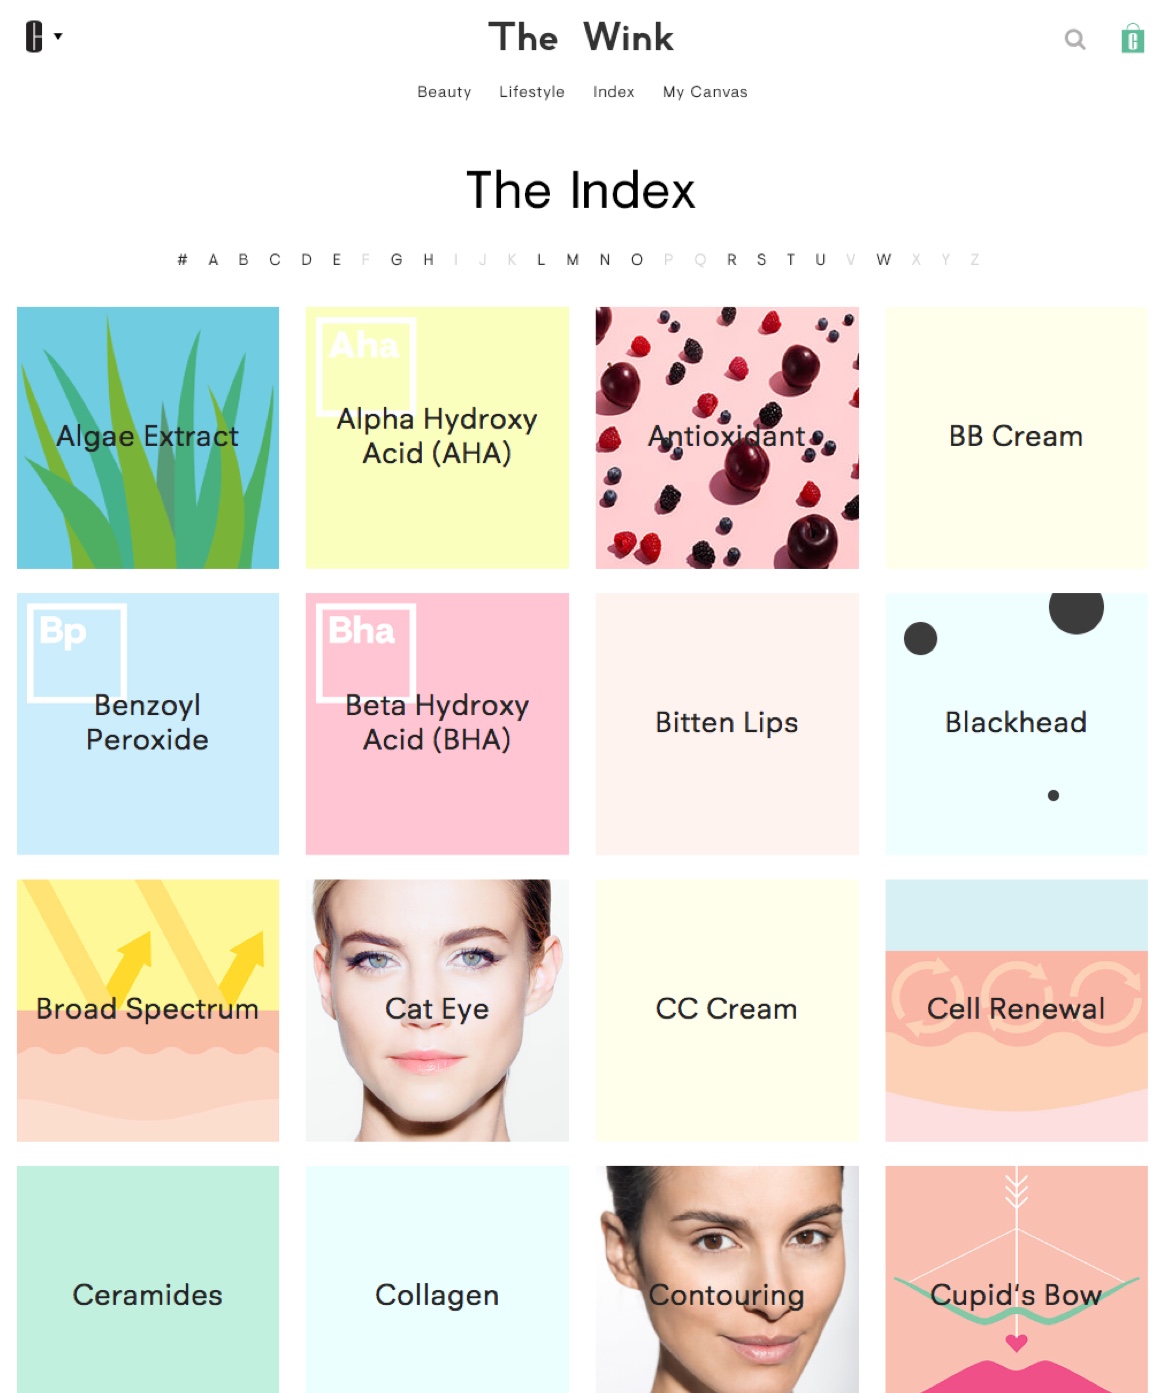 The Wink by Clinique Beauty Index